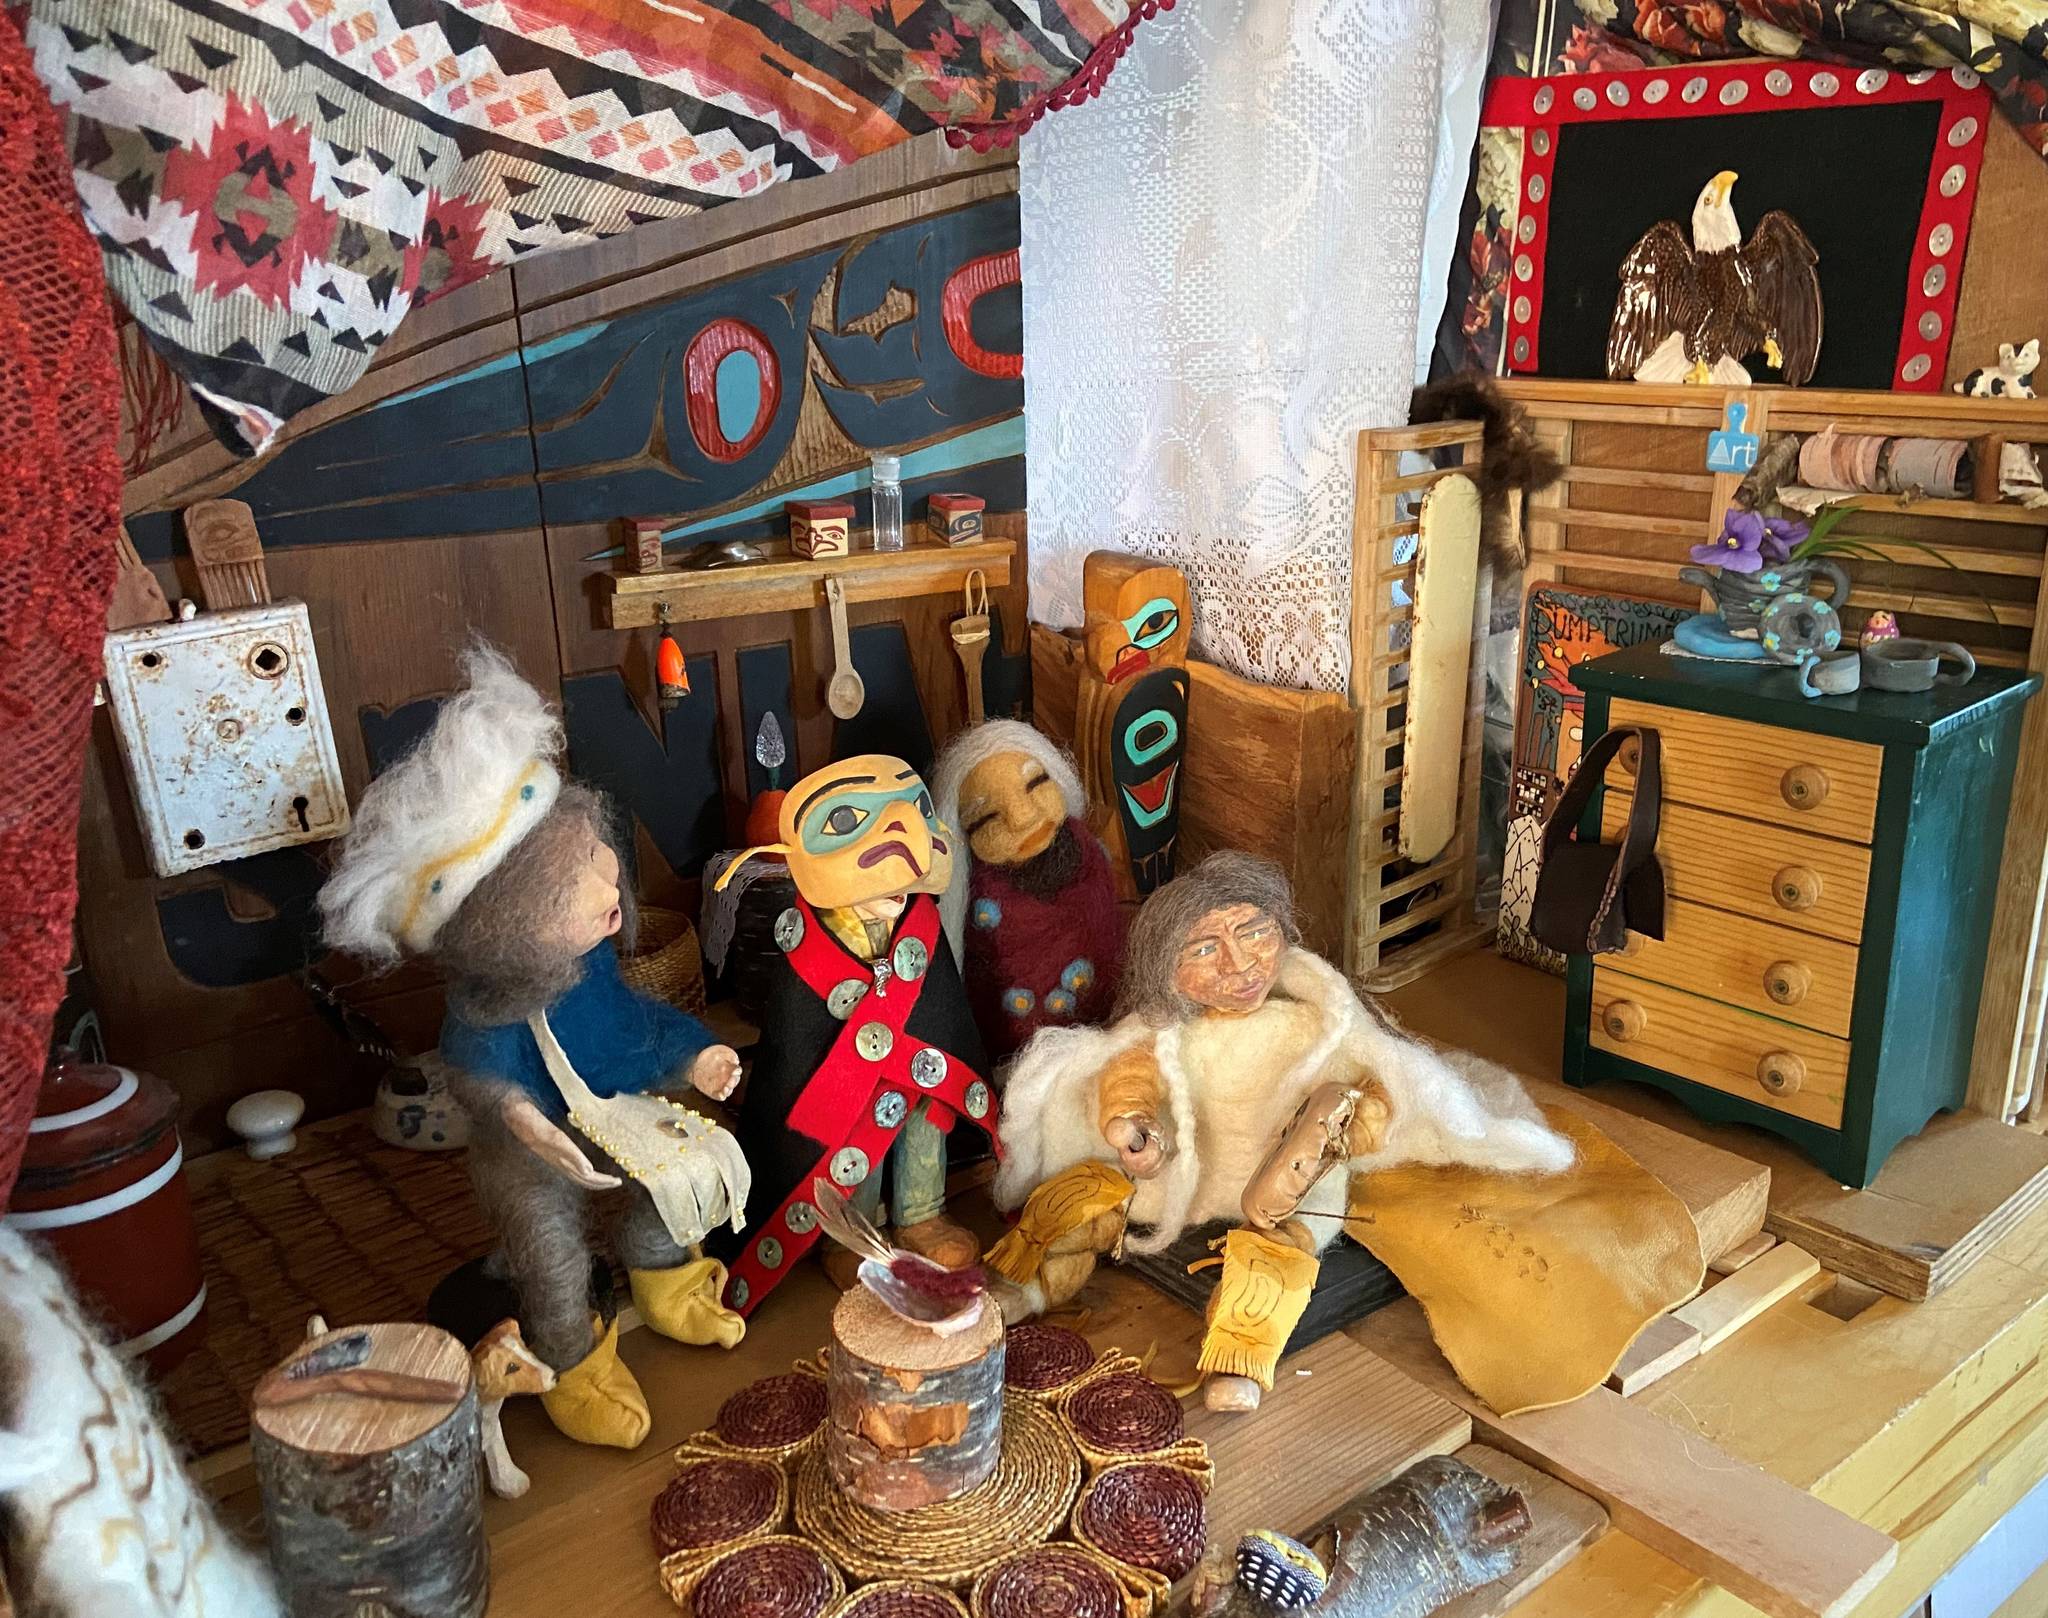 This photo shows dolls and dioramas by Kristina Cranston. (Courtesy Photo/ Kristina Cranston)